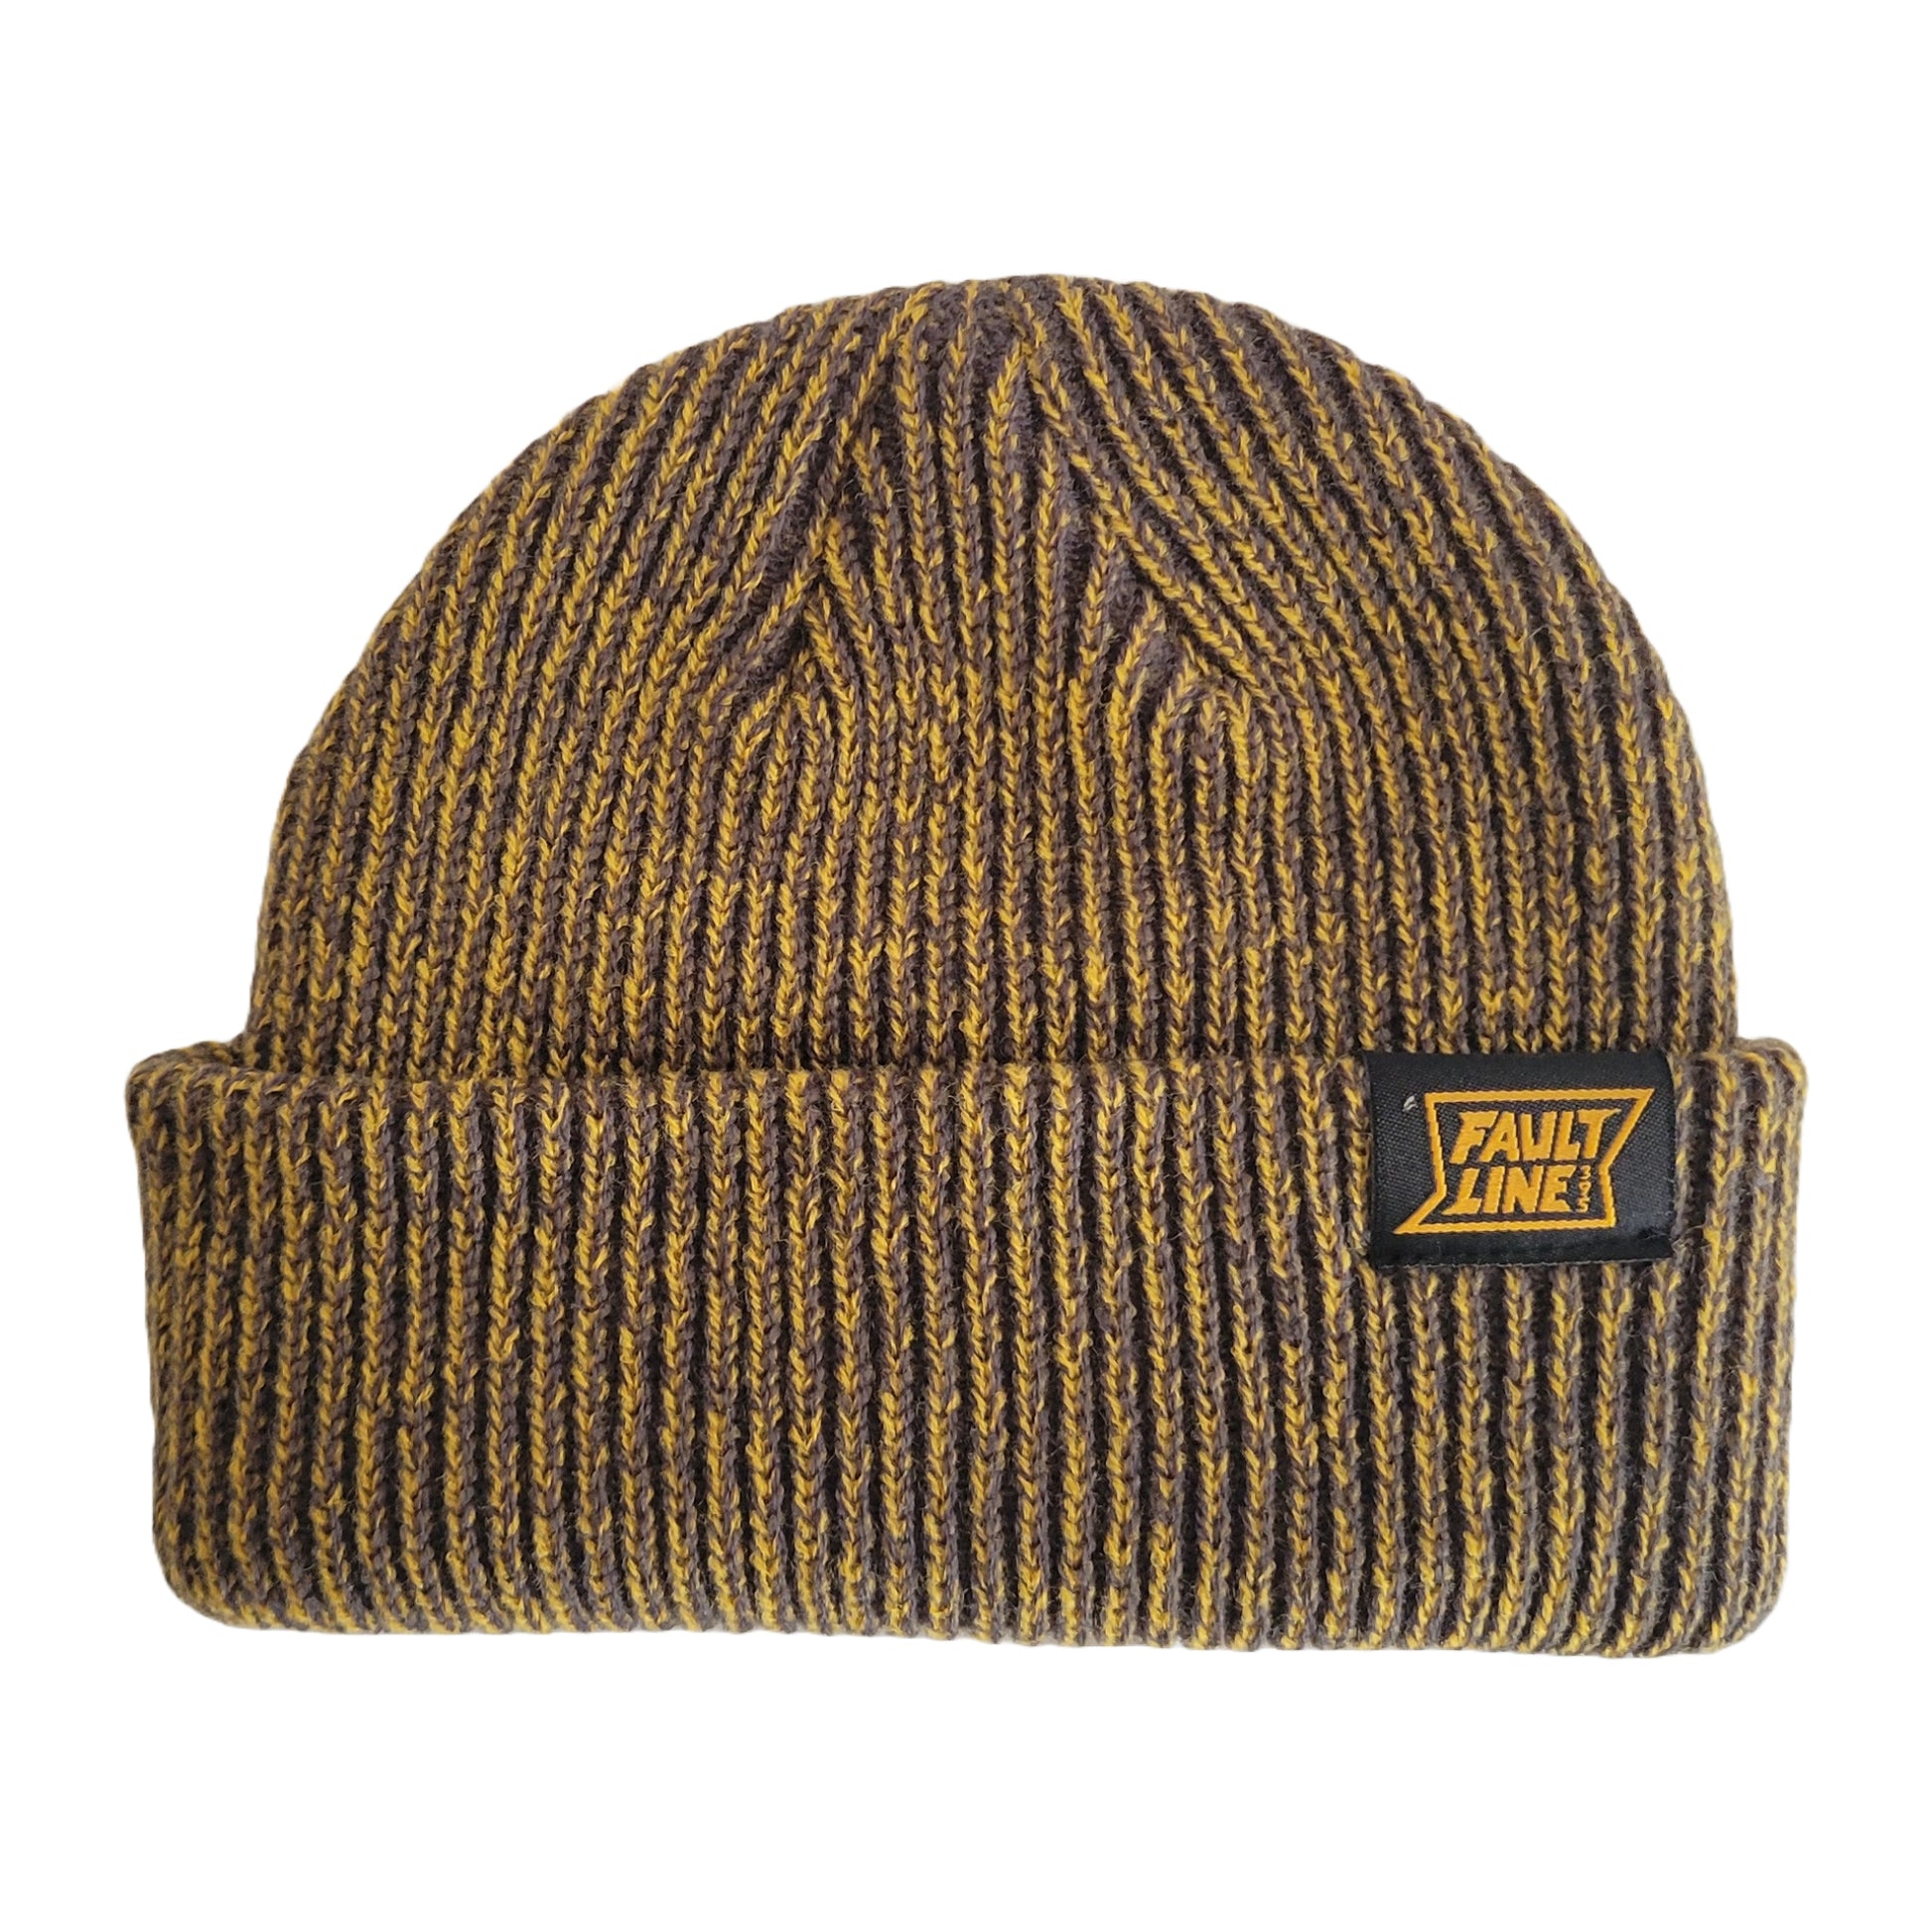 Broadway Beanie - – Charcoal/Gold Faultline395 | FaultLine395